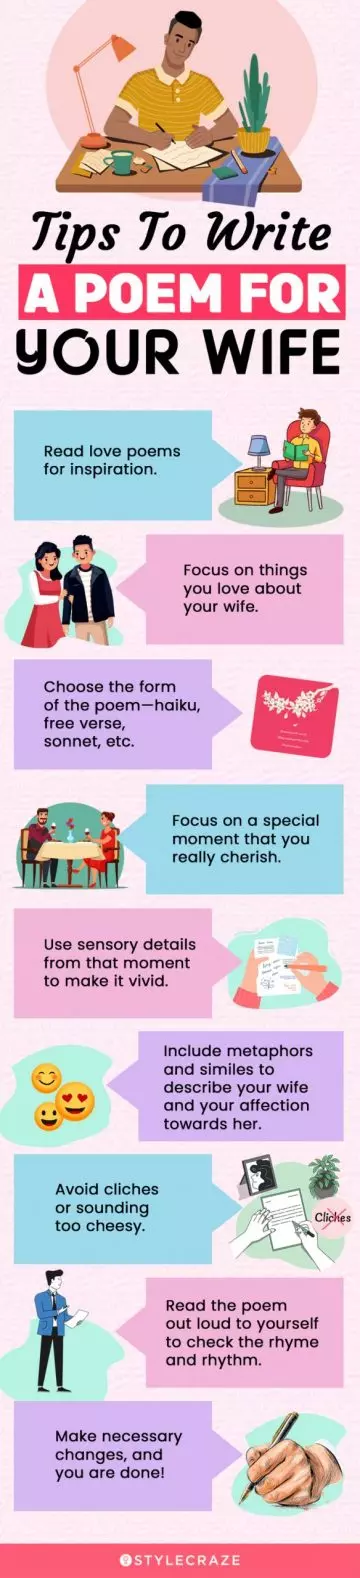 tips to write a poem for your wife (infographic)